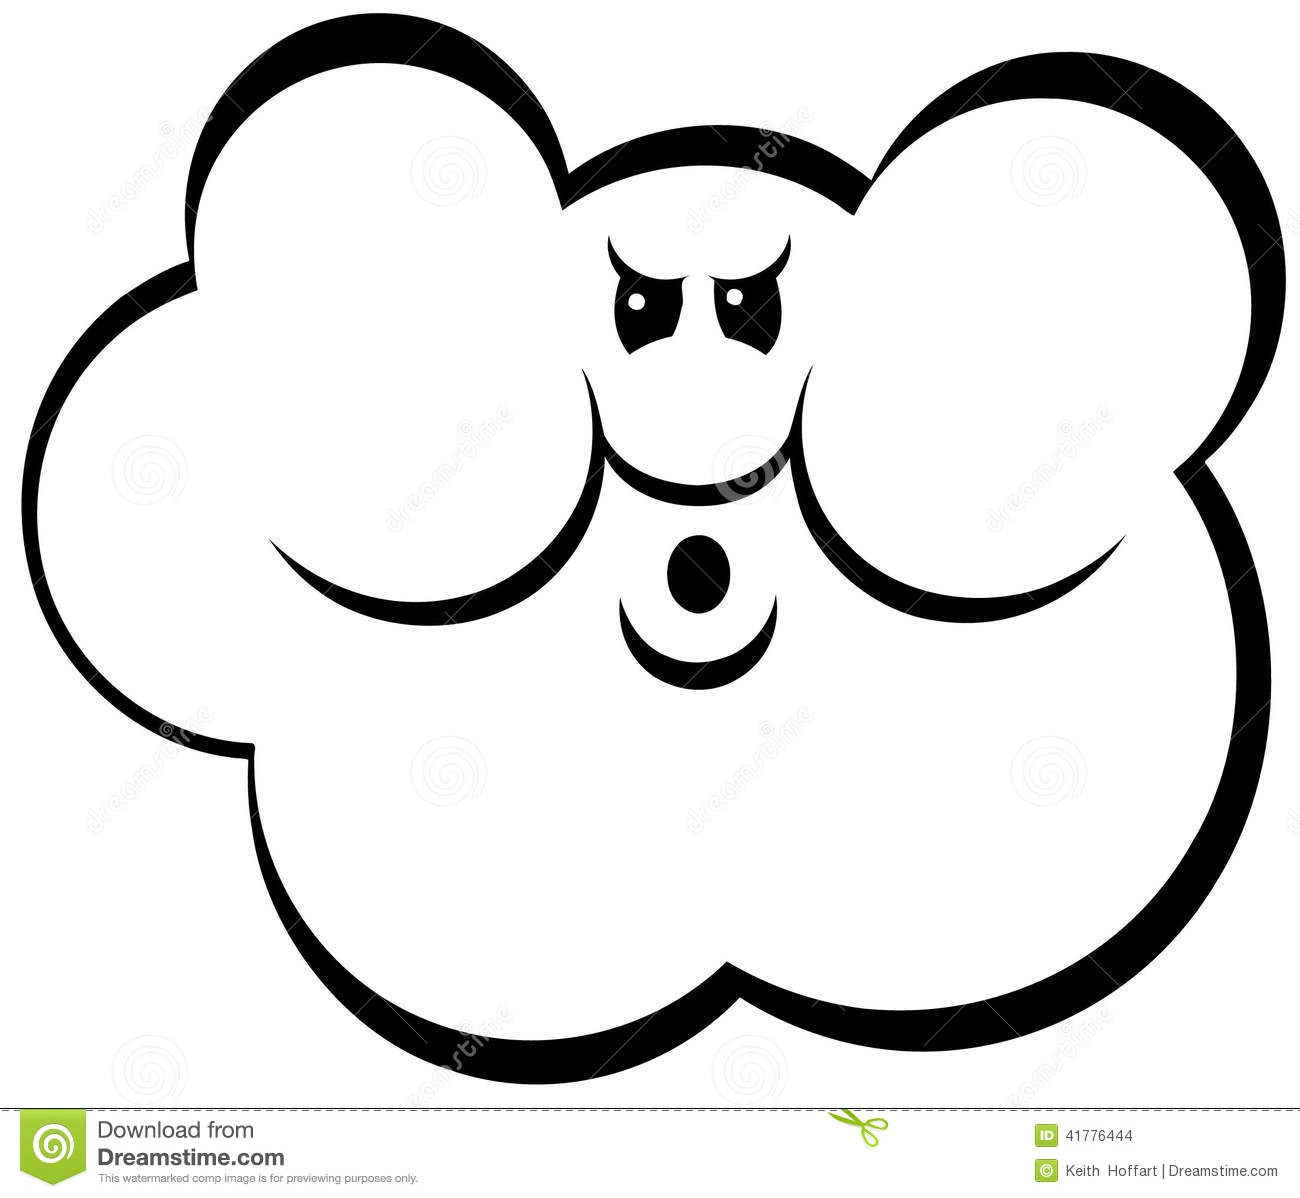 Angry Cloud Cartoon Vector Clipart Created In Adobe Illustrator In Eps